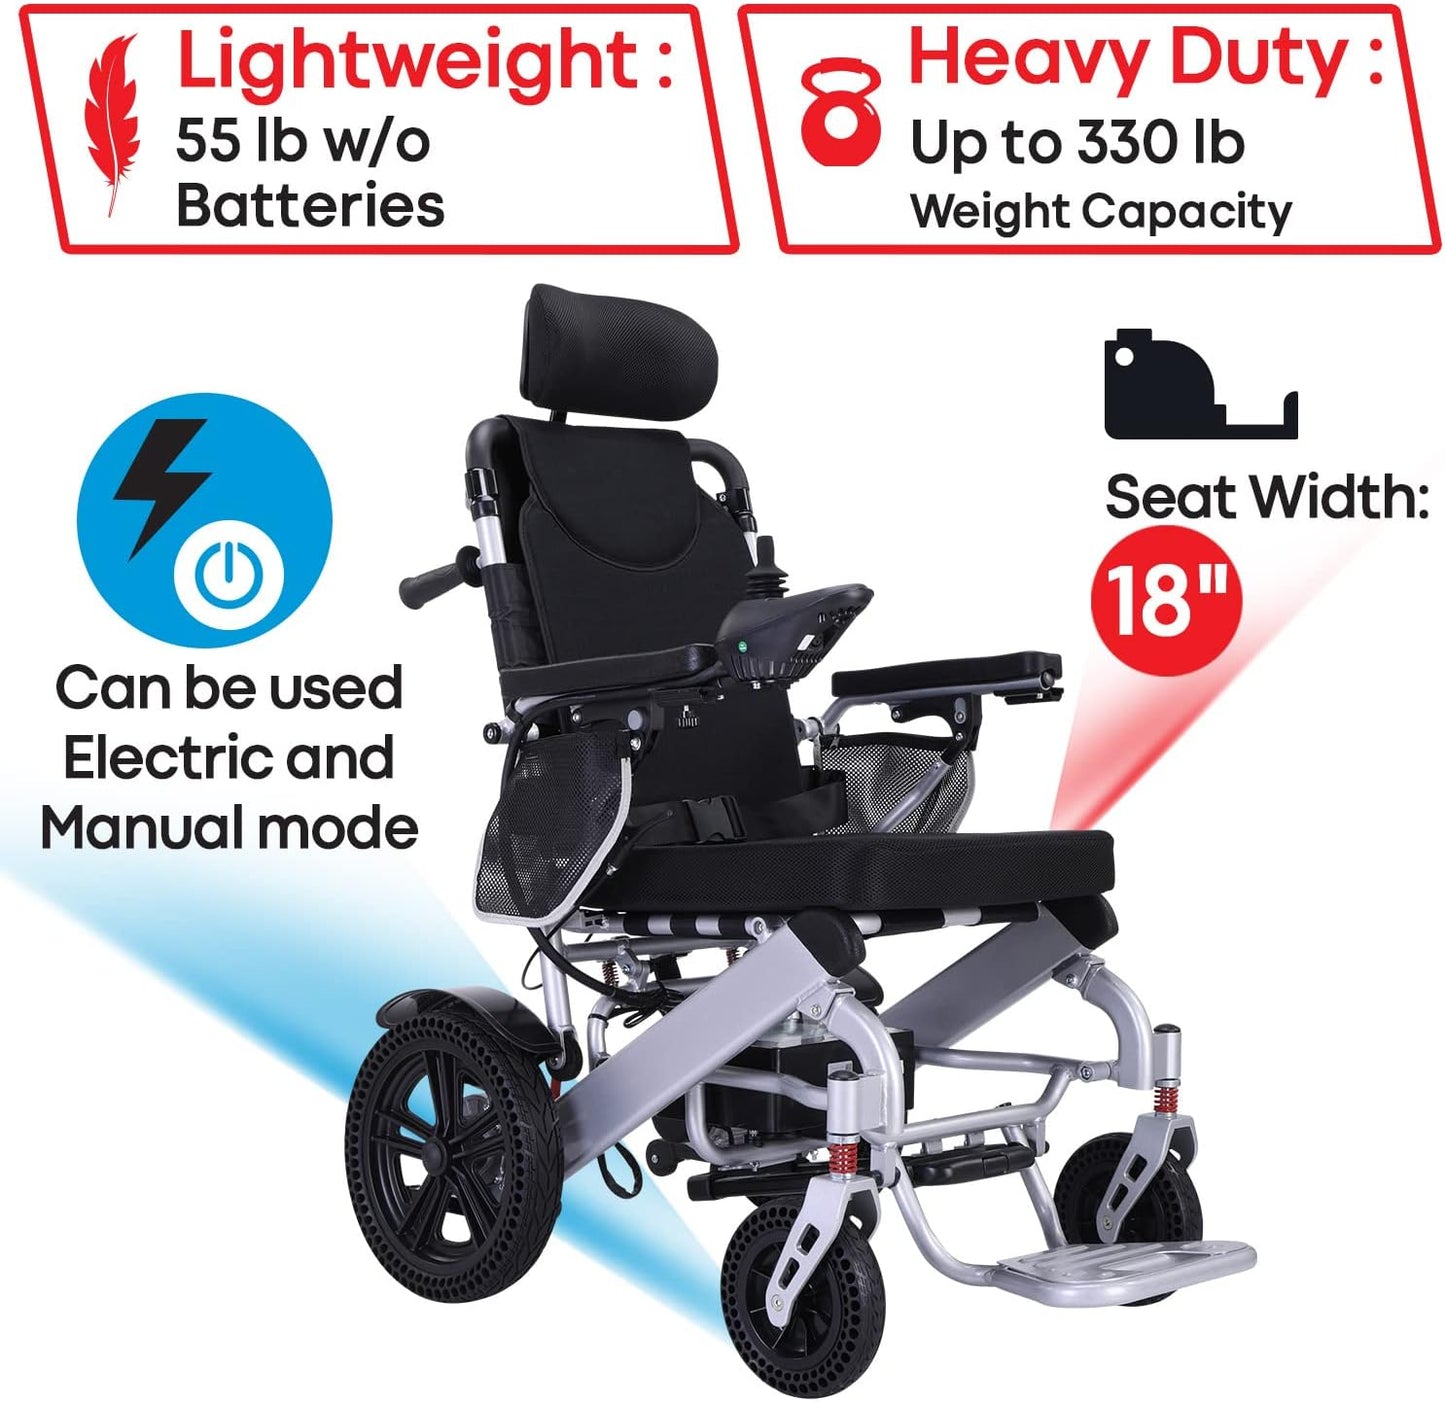 Wheelchair - ActiWe WX11 Electric Wheelchairs for Adults Reclining Foldable Electric Wheelchair All Terrain Motorized Wheelchair for Adults Portable Folding Power Wheel Chair, Silla de Ruedas Electrica -Silver